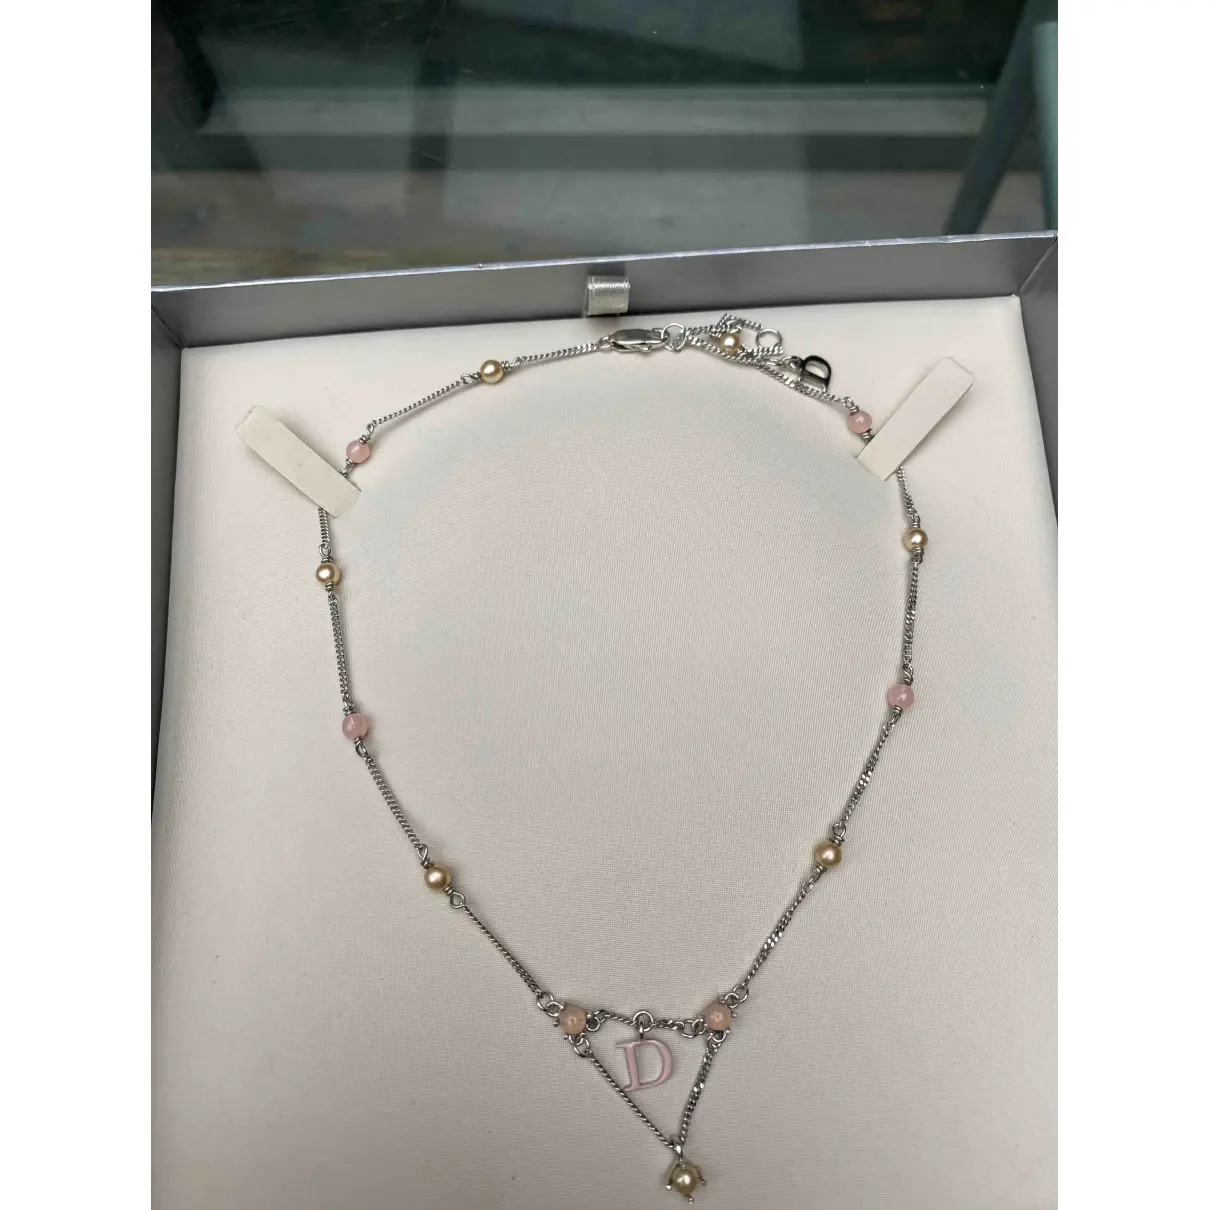 Necklace Christian Dior